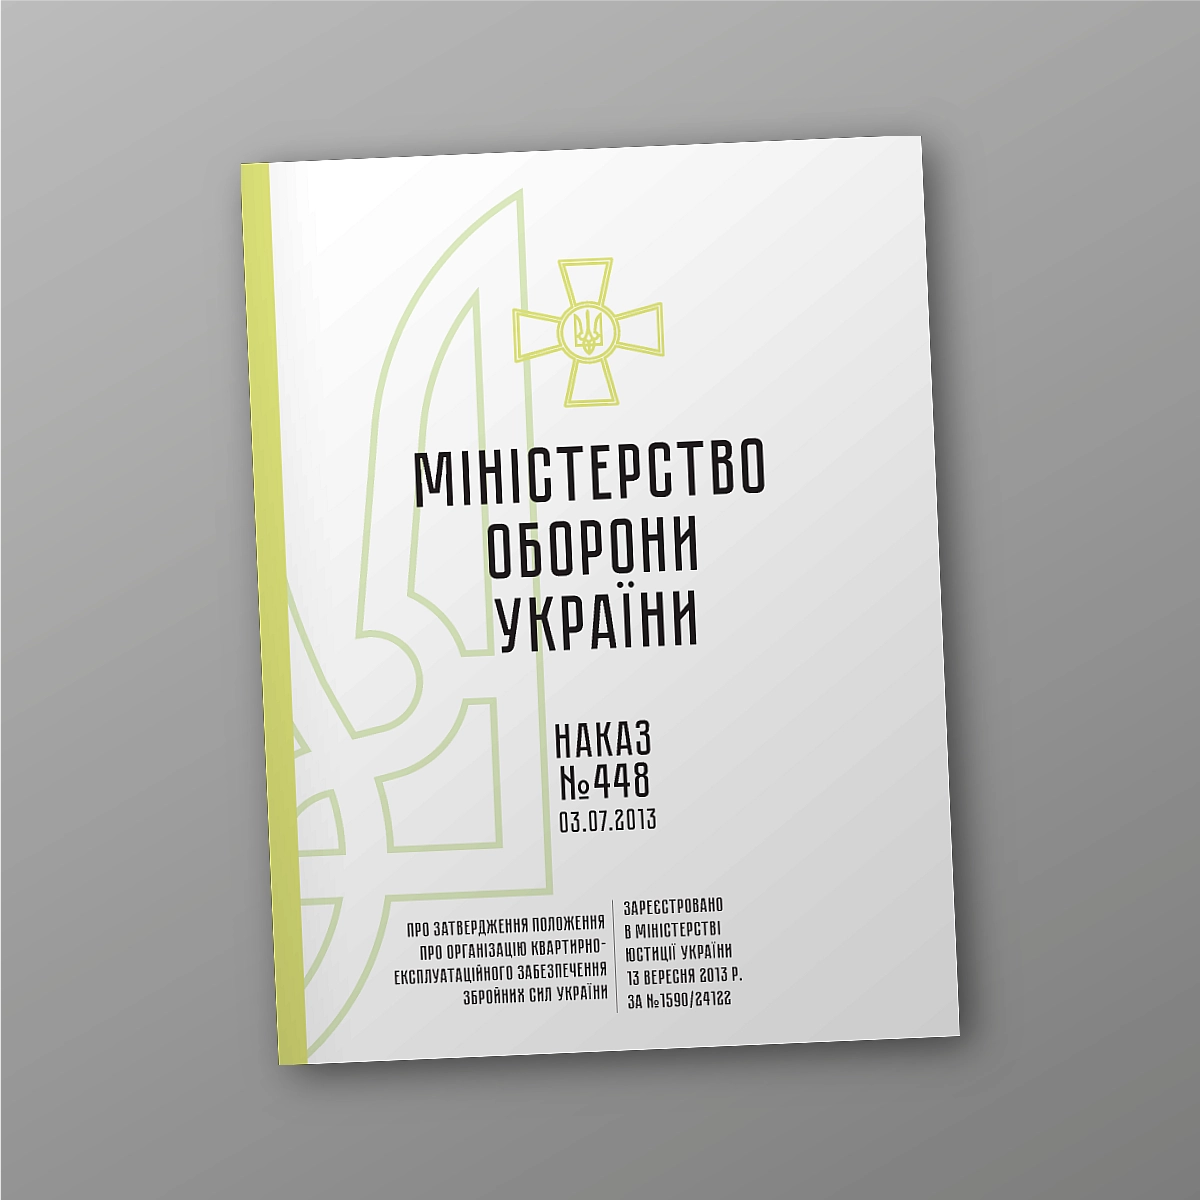 Order 448 + Appendices. On the approval of the Regulation on the organization of housing and operational support of the Armed Forces of Ukraine | PrintTo: